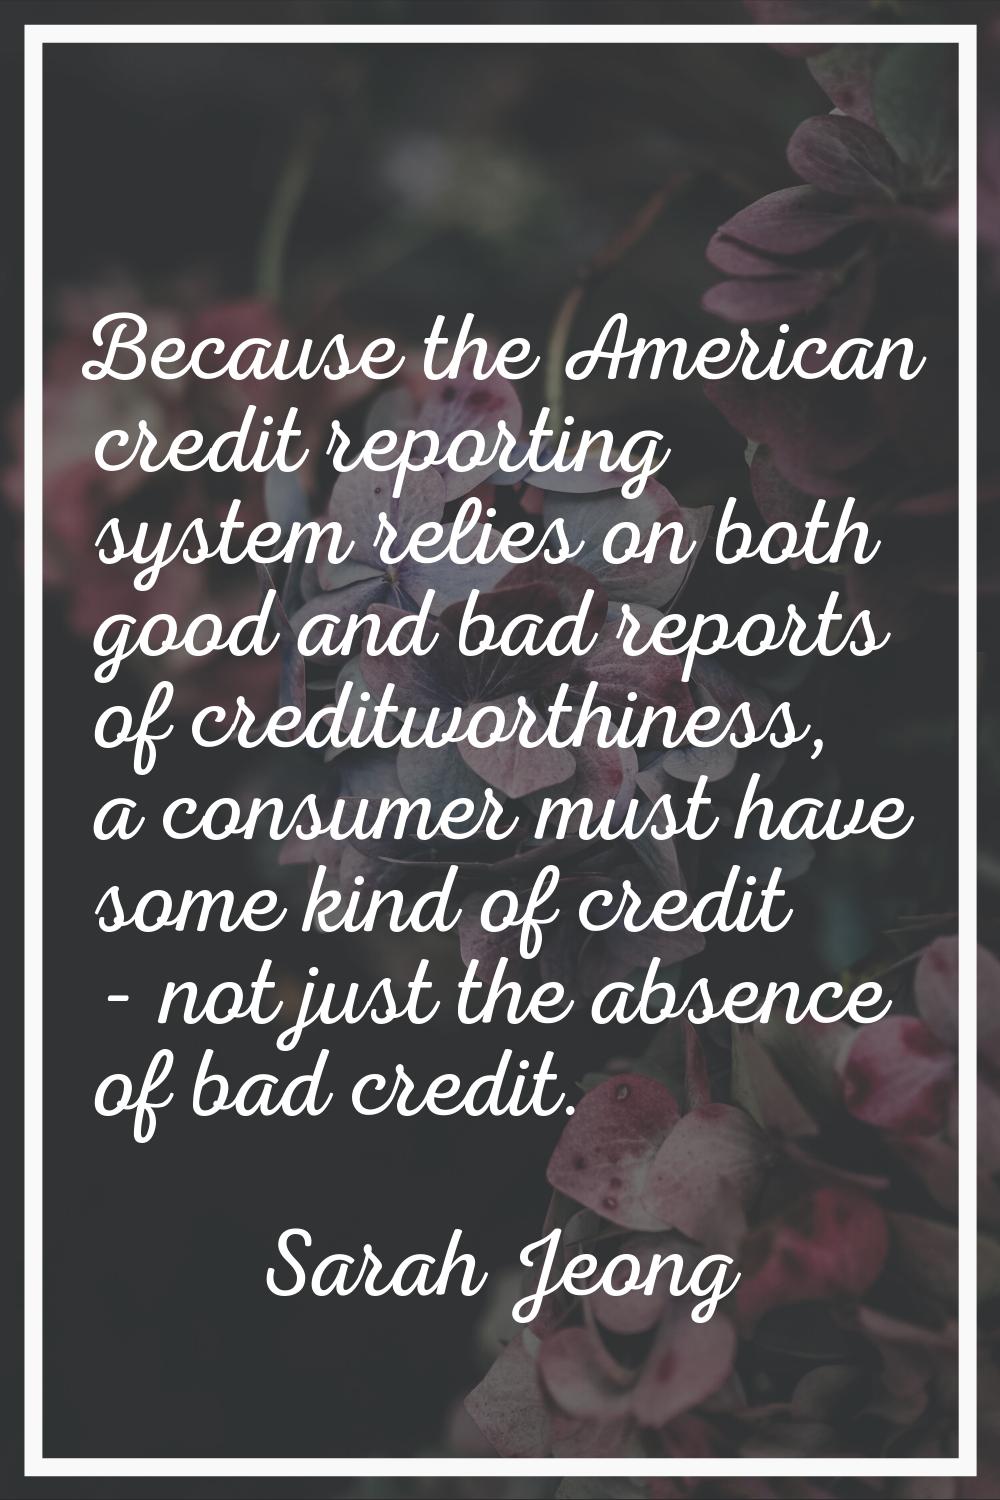 Because the American credit reporting system relies on both good and bad reports of creditworthines